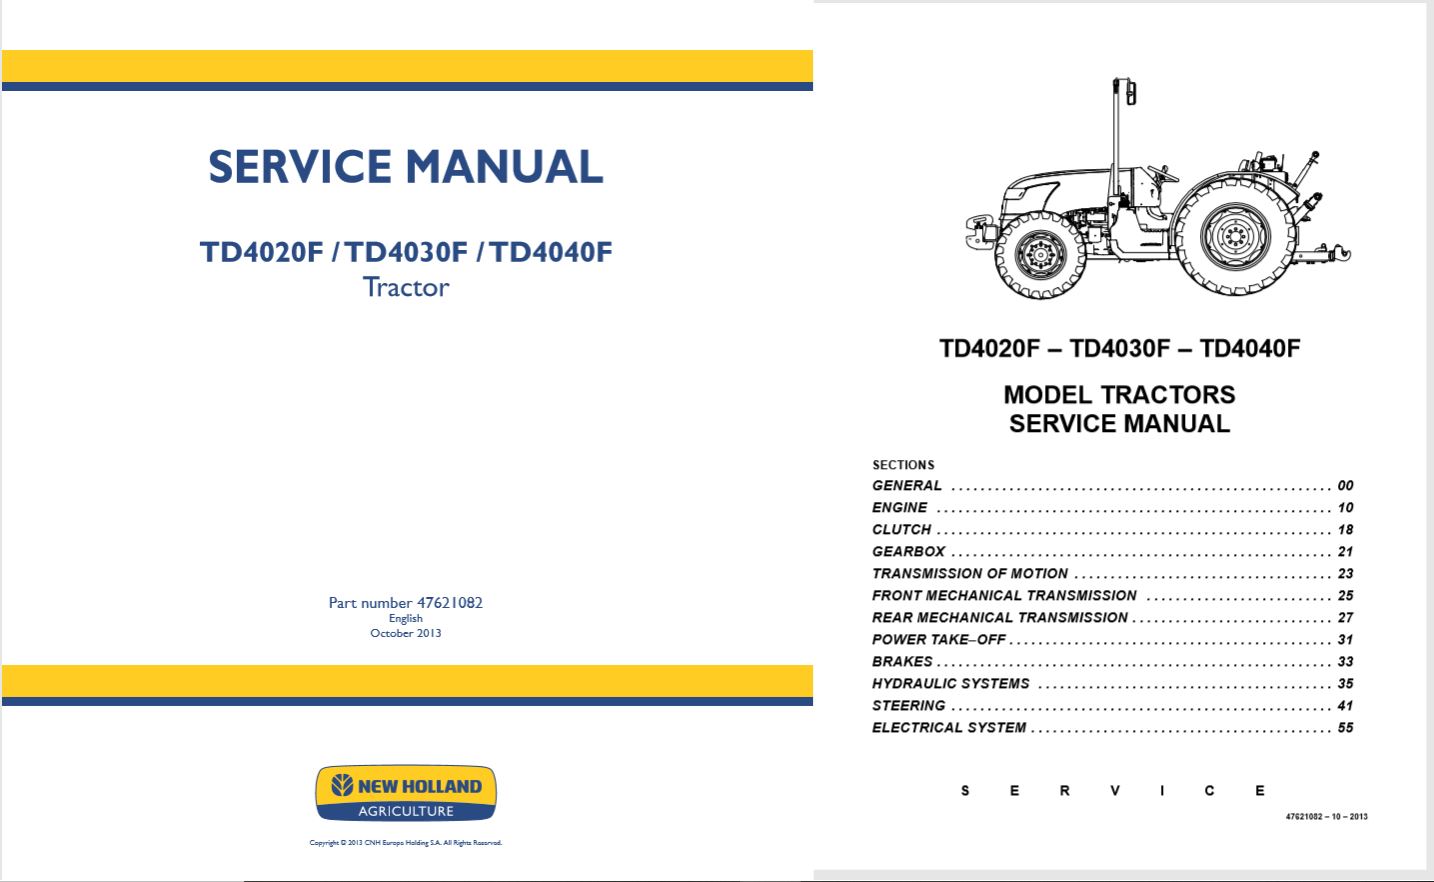 new holland manuals free download